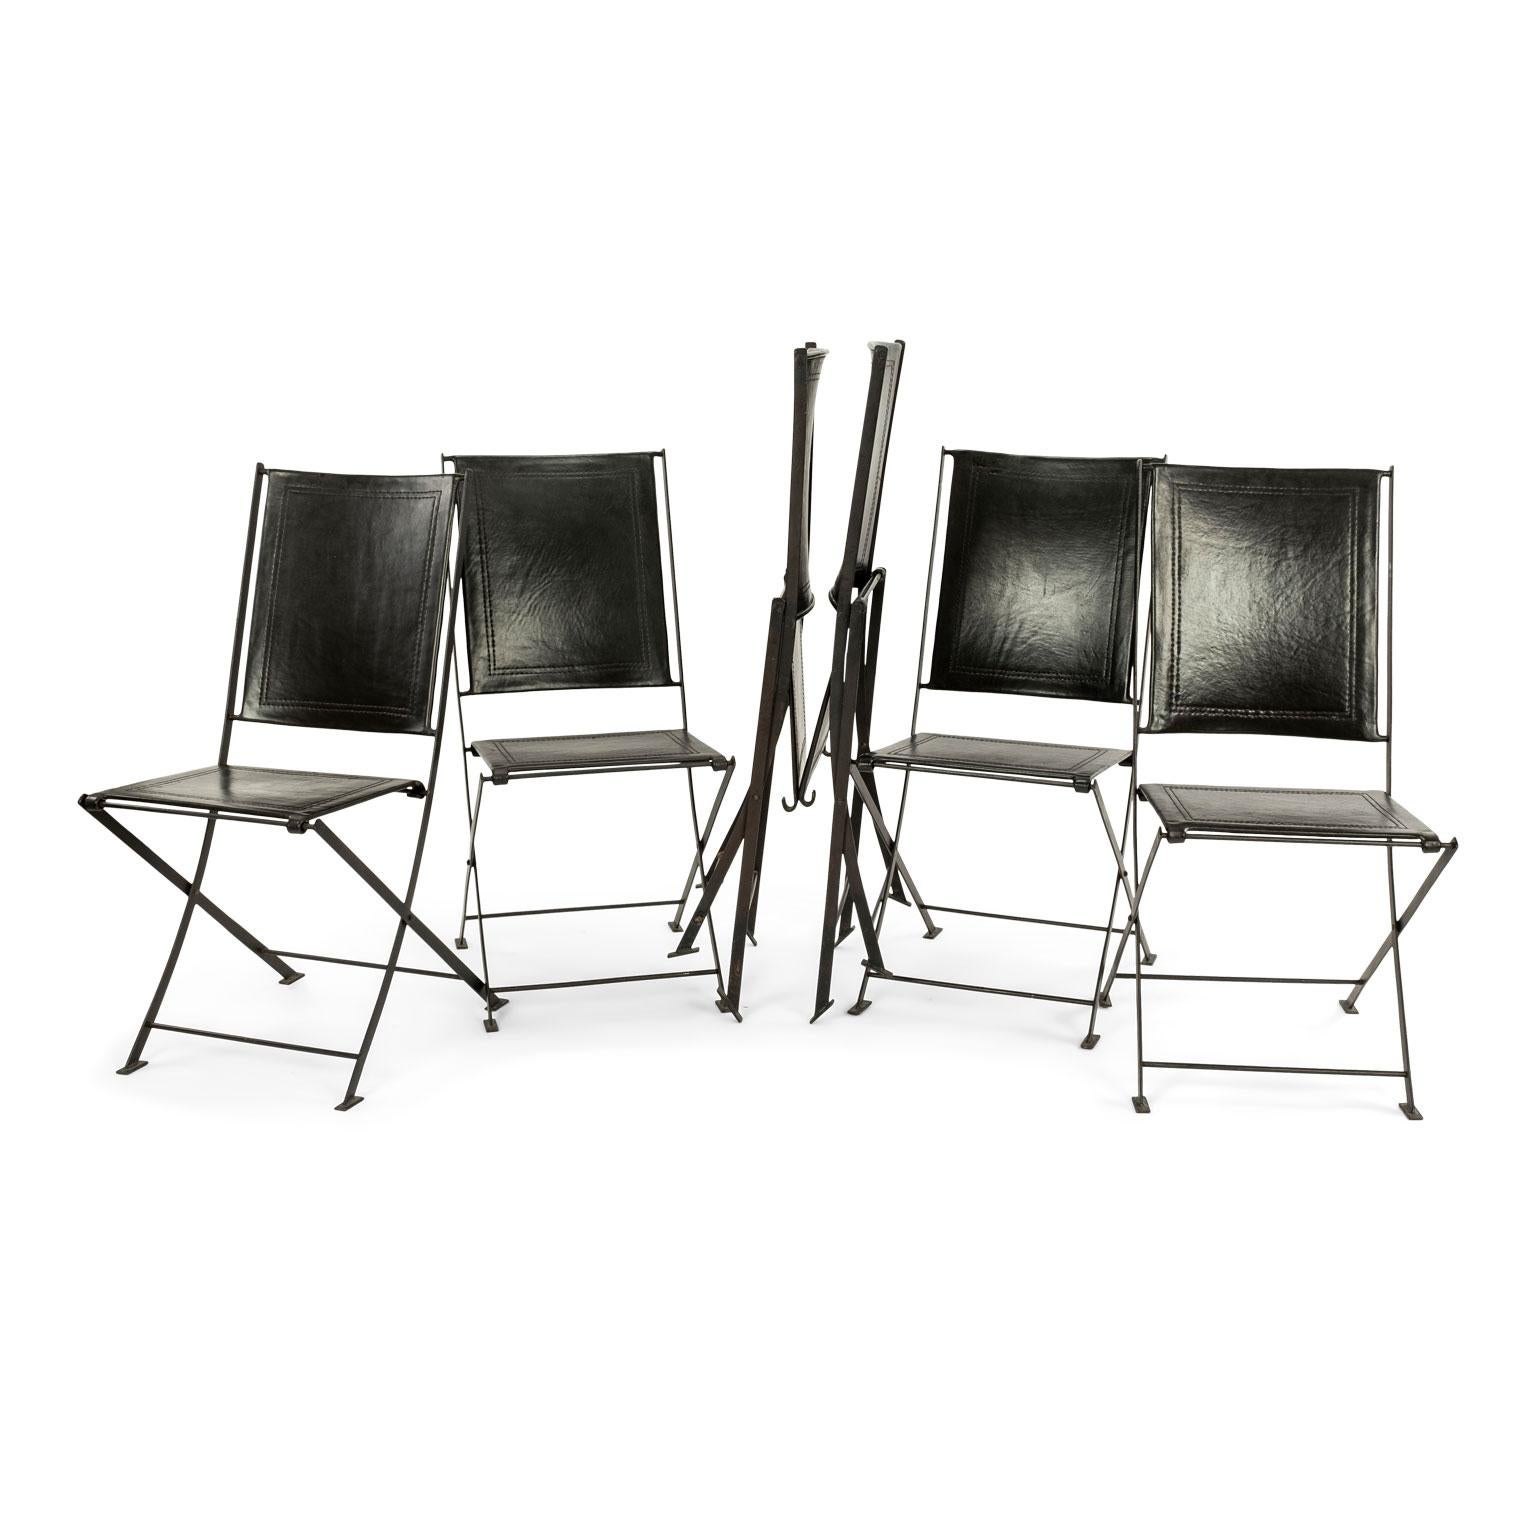 Set of six campaign style leather and steel dining chairs circa 1995-2005. Six campaign style folding chairs, purchased in France. Sturdy forged steel frames upholstered in thick quality dark brown leather. Decorative stitched detail adorns seats